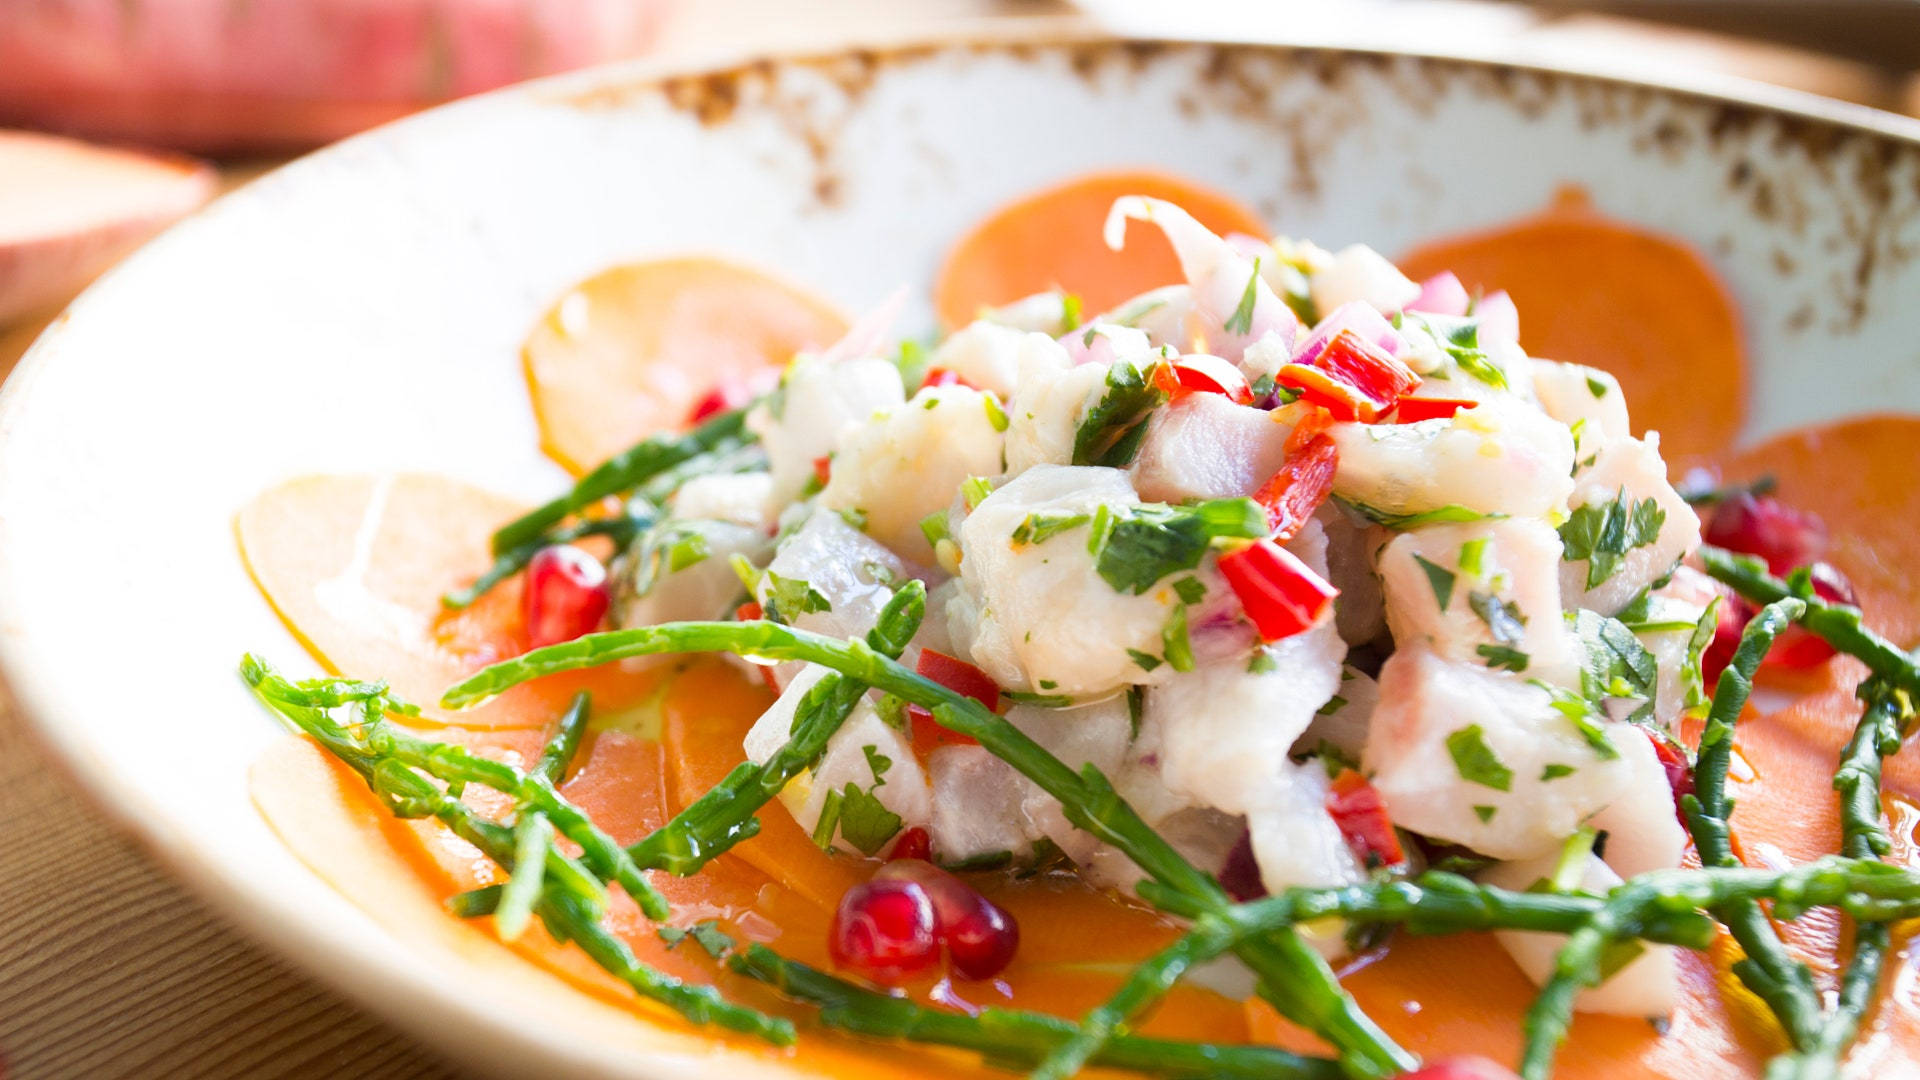 Caption: Spicy Ceviche Garnished with Herbs and Chilies Wallpaper